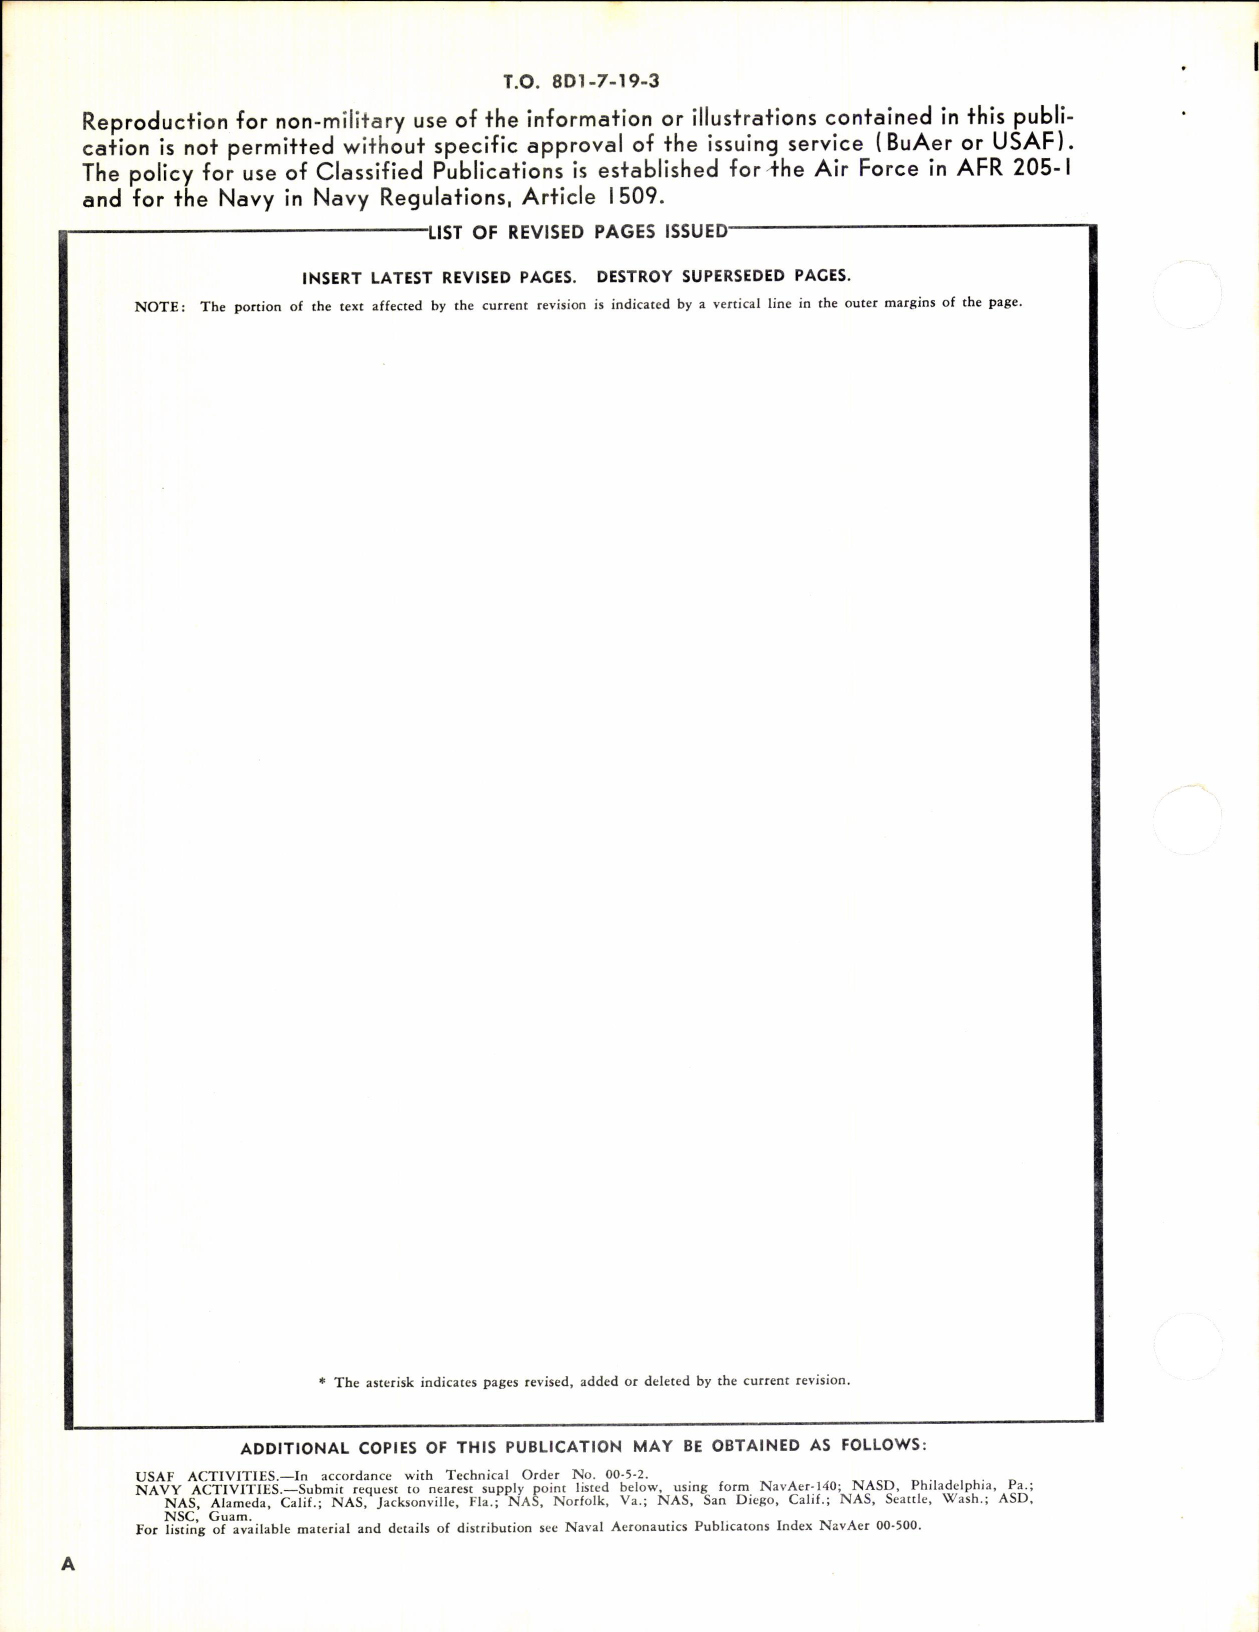 Sample page 2 from AirCorps Library document: Instructions for Wing Flap Actuator Part No D1390